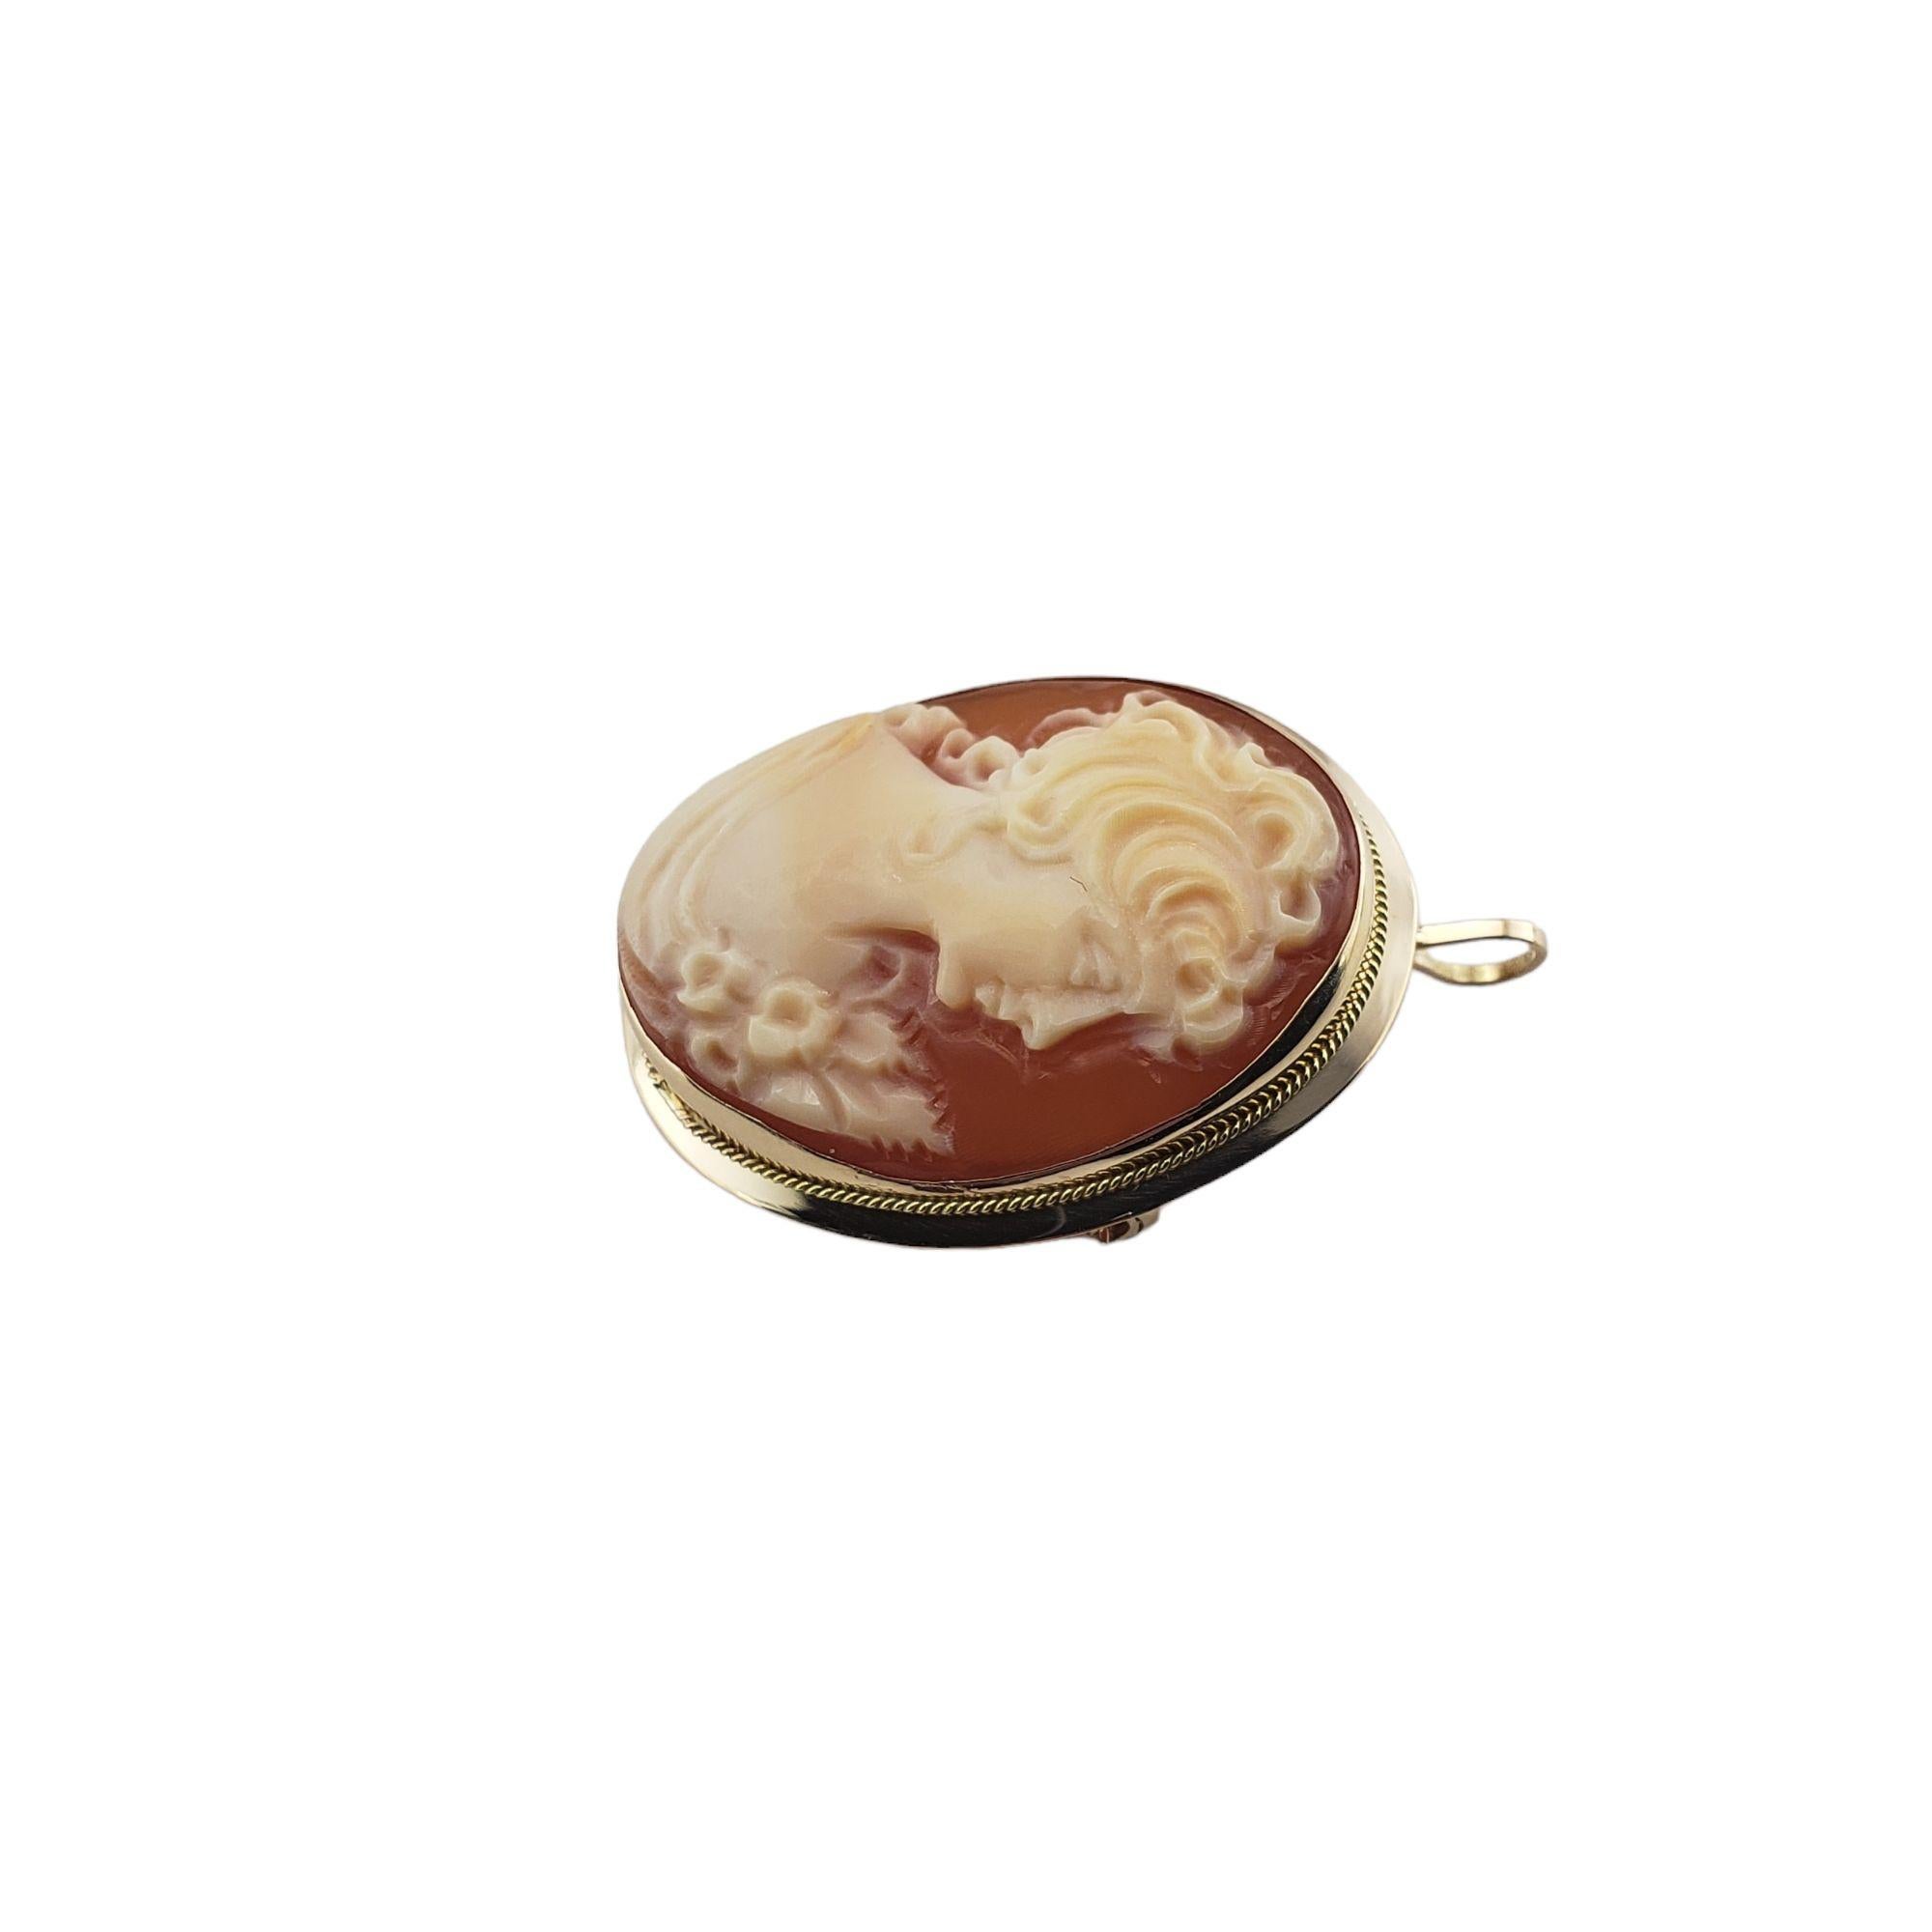 Vintage 14 Karat Yellow Gold Cameo Brooch/Pendant-

This elegant cameo brooch features a lovely lady in profile set in classic 14K yellow gold. Can be worn as a brooch or a pendant.

Size: 28 mm x 22 mm

Weight: 2.6 dwt. / 4.1 gr.

Stamped: Italy